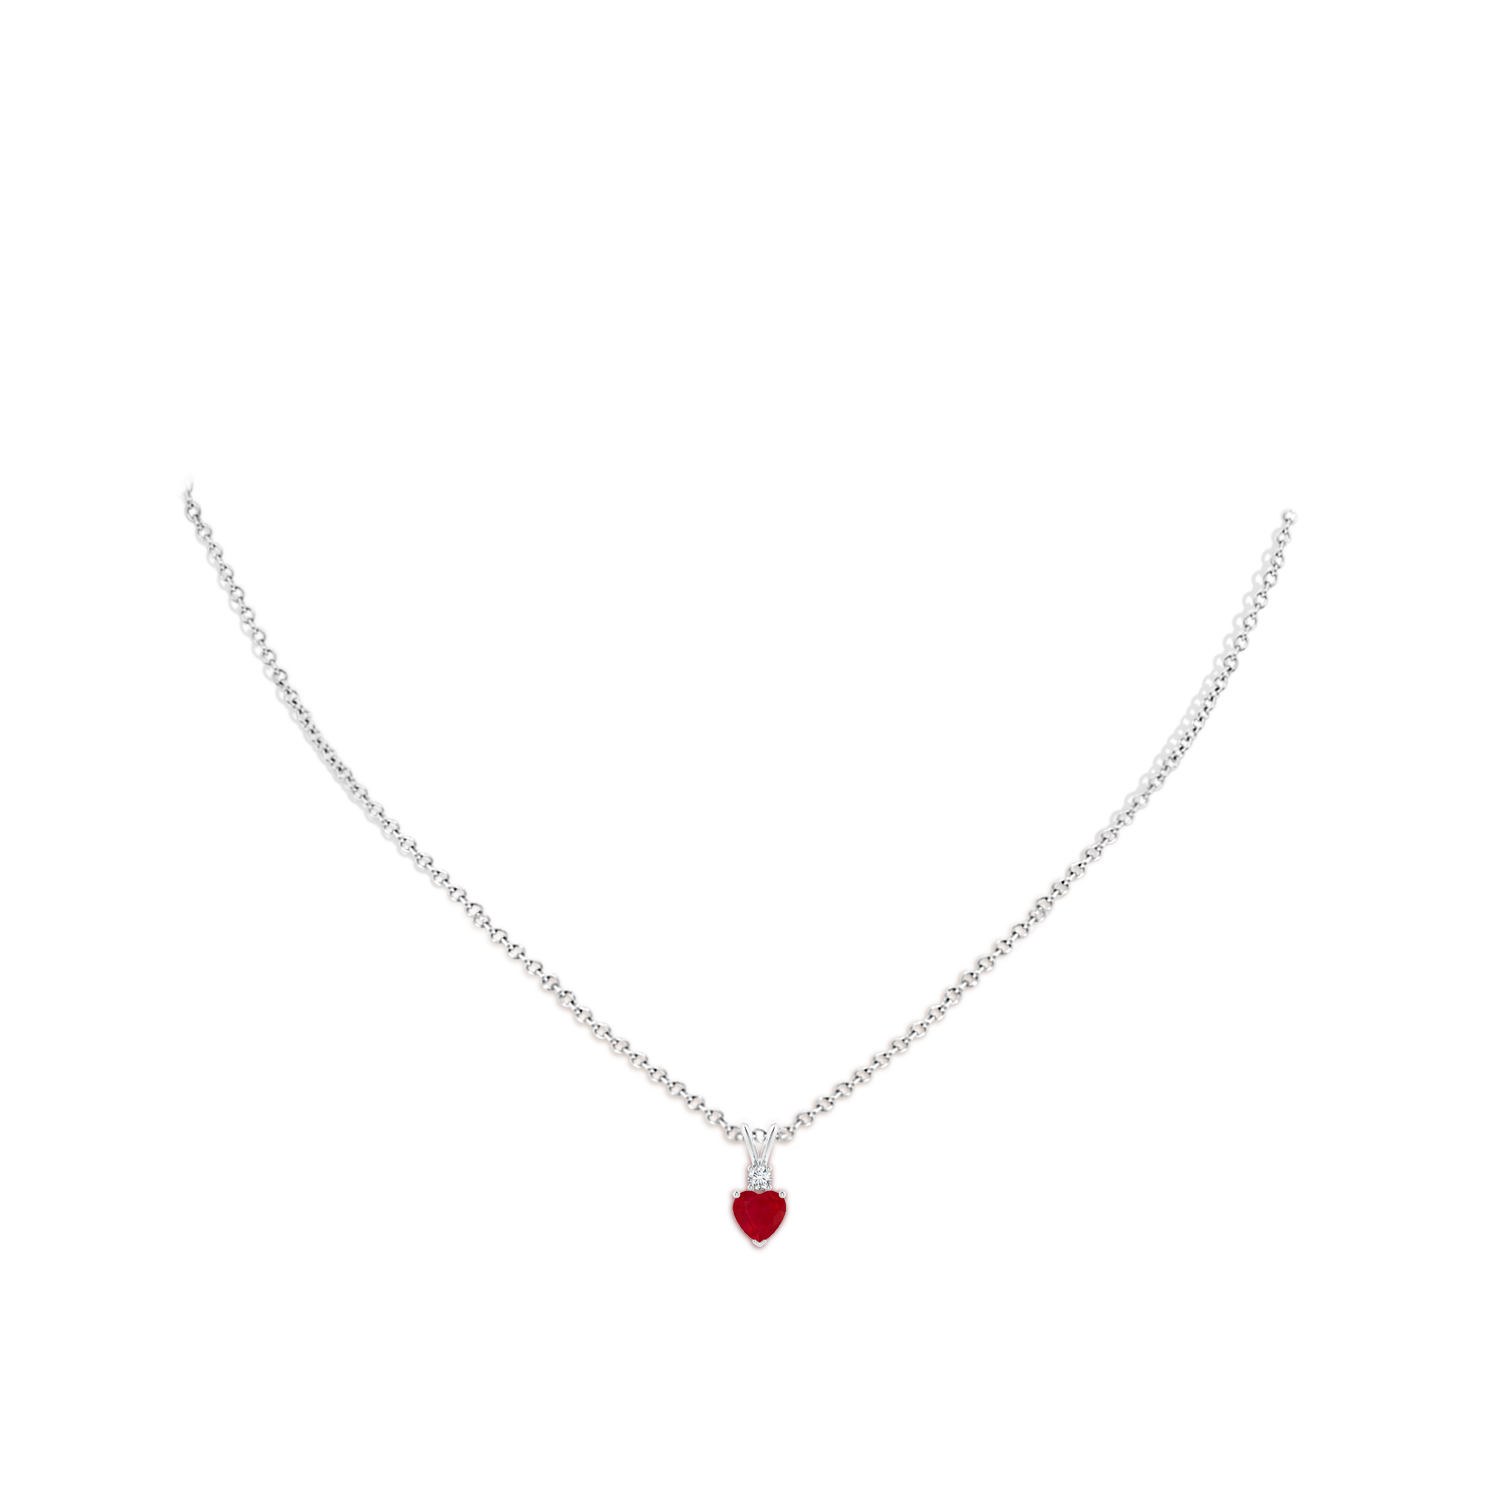 AA - Ruby / 0.59 CT / 14 KT White Gold